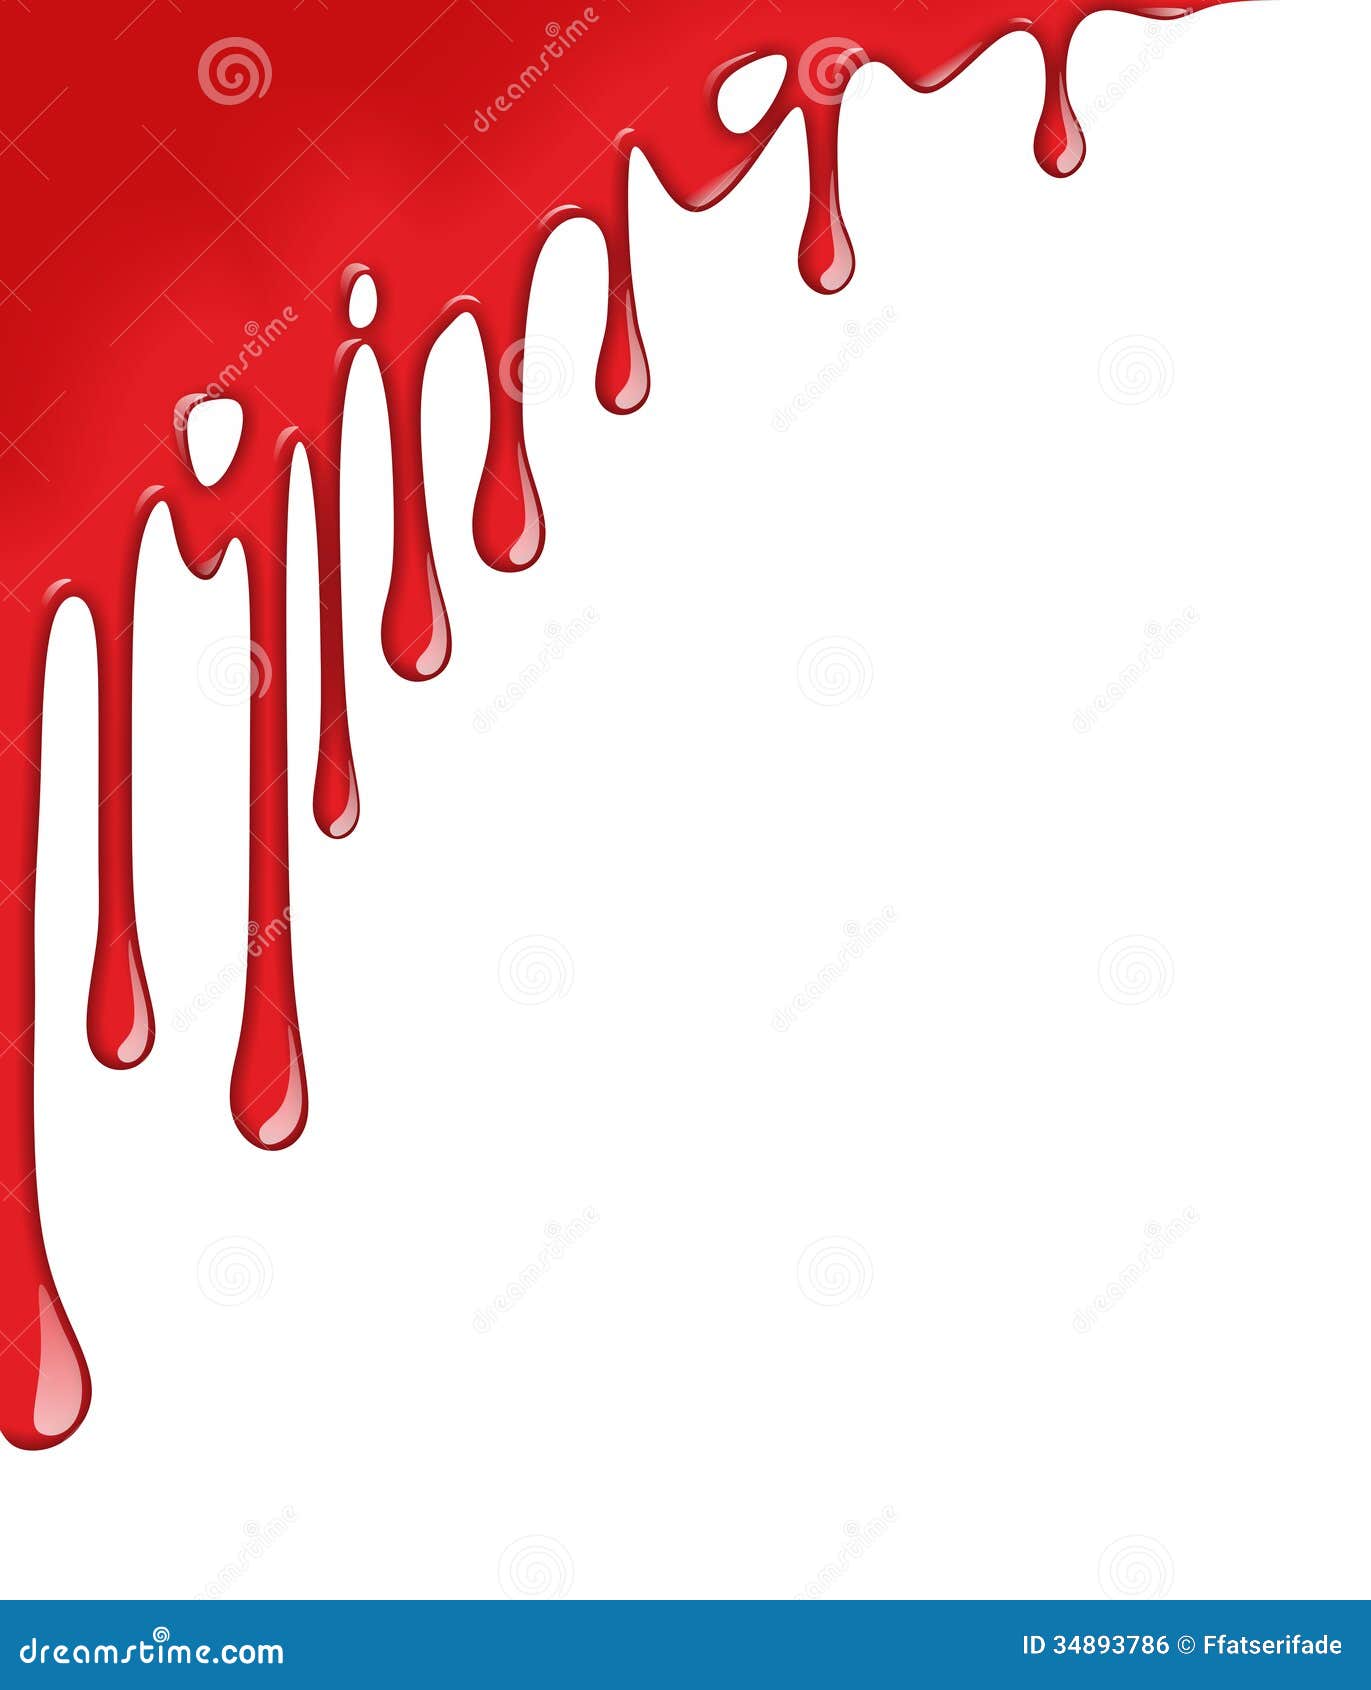 dripping blood clipart border - photo #13